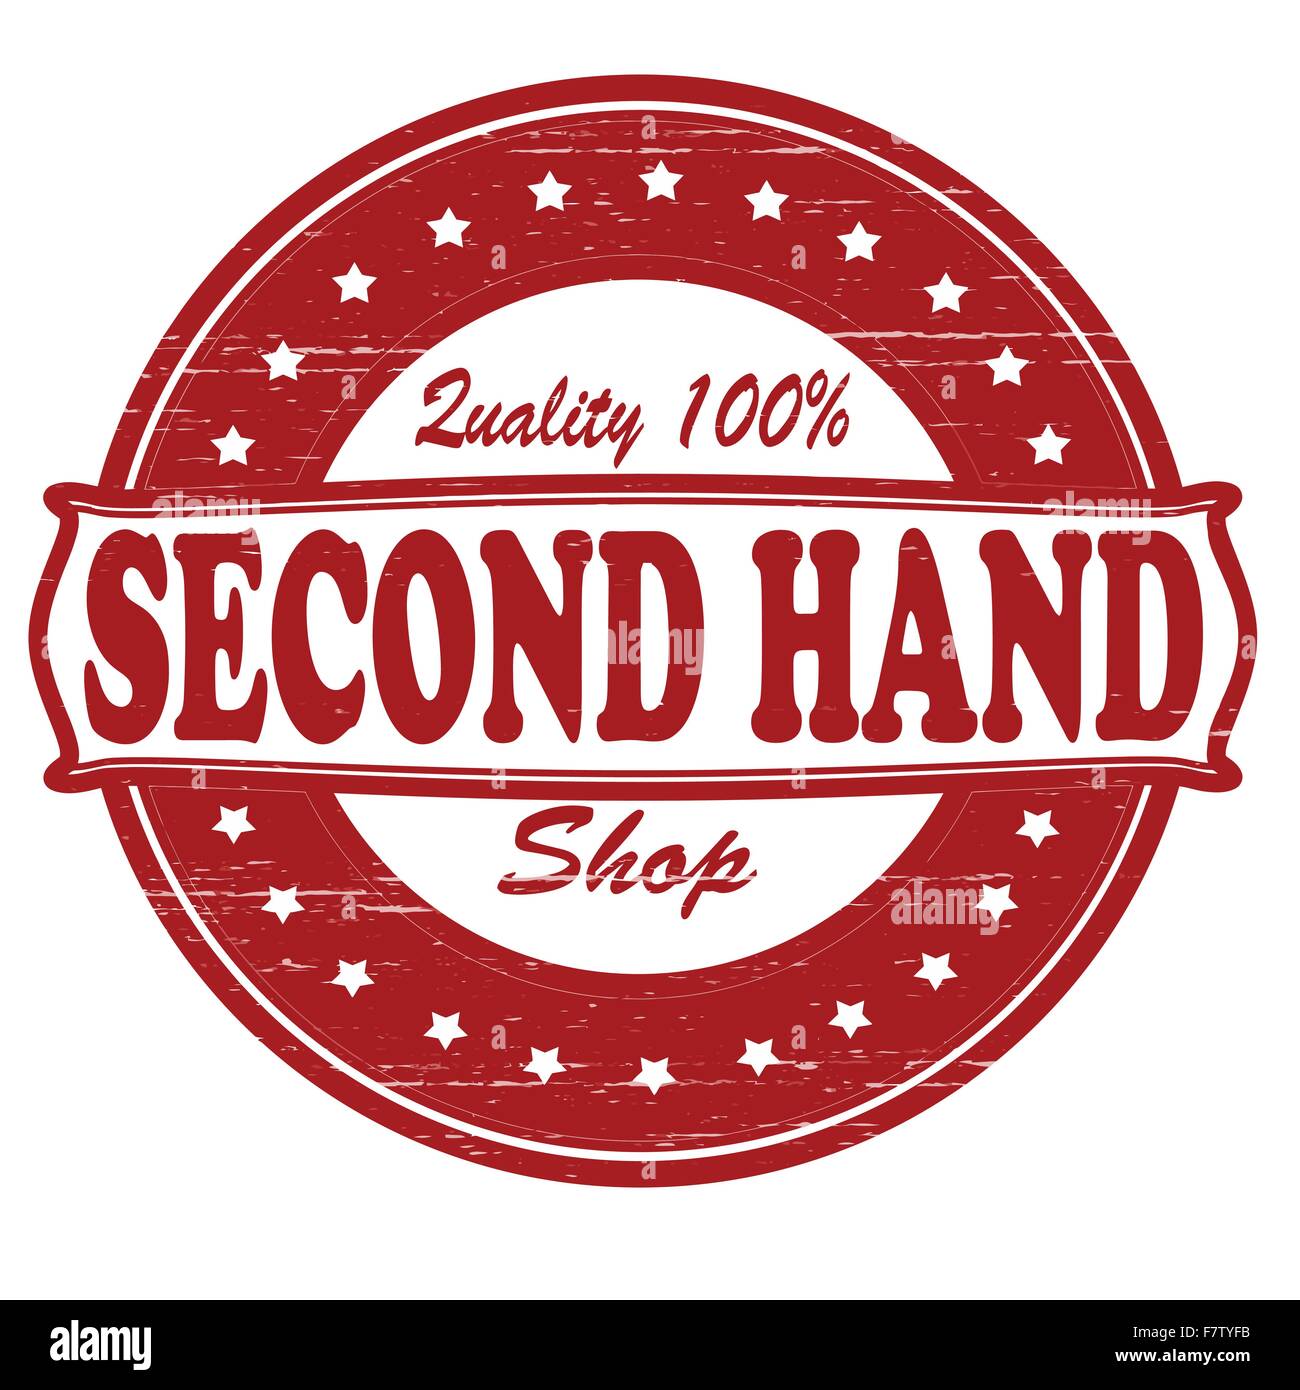 Second hand Stock Vector Images - Alamy